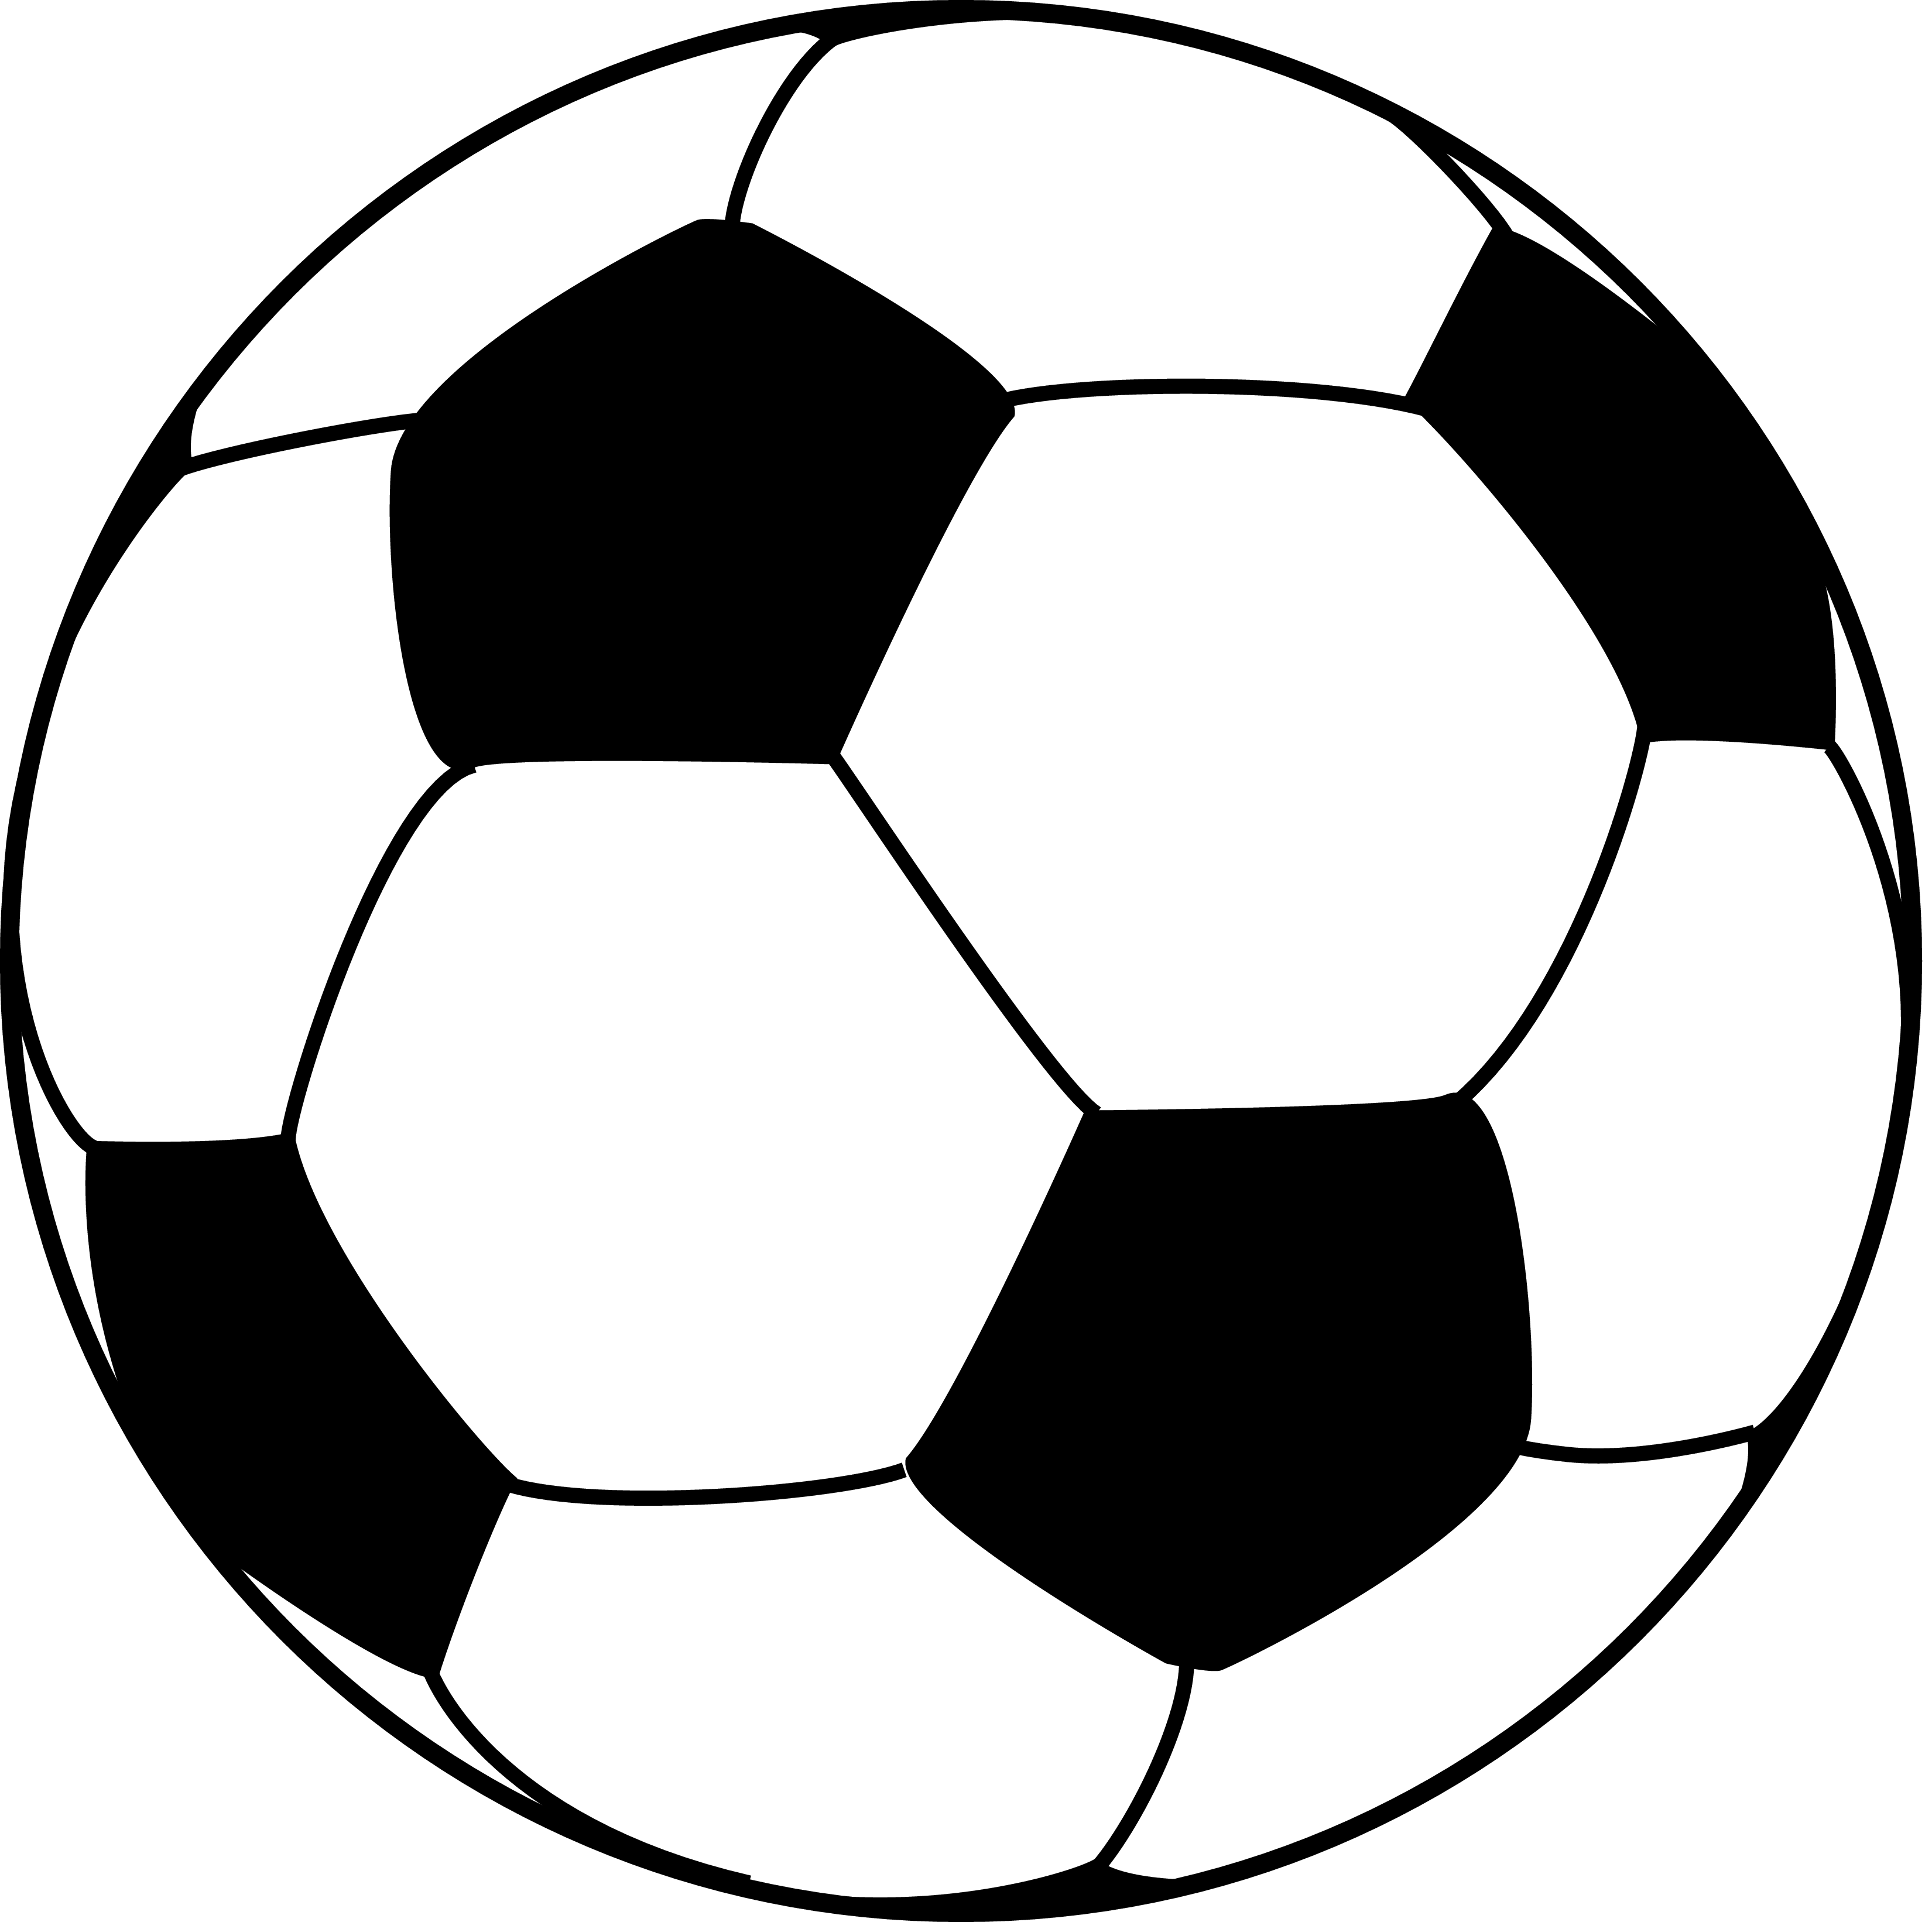 Goals clipart soccer striker. Ball drawing easy at